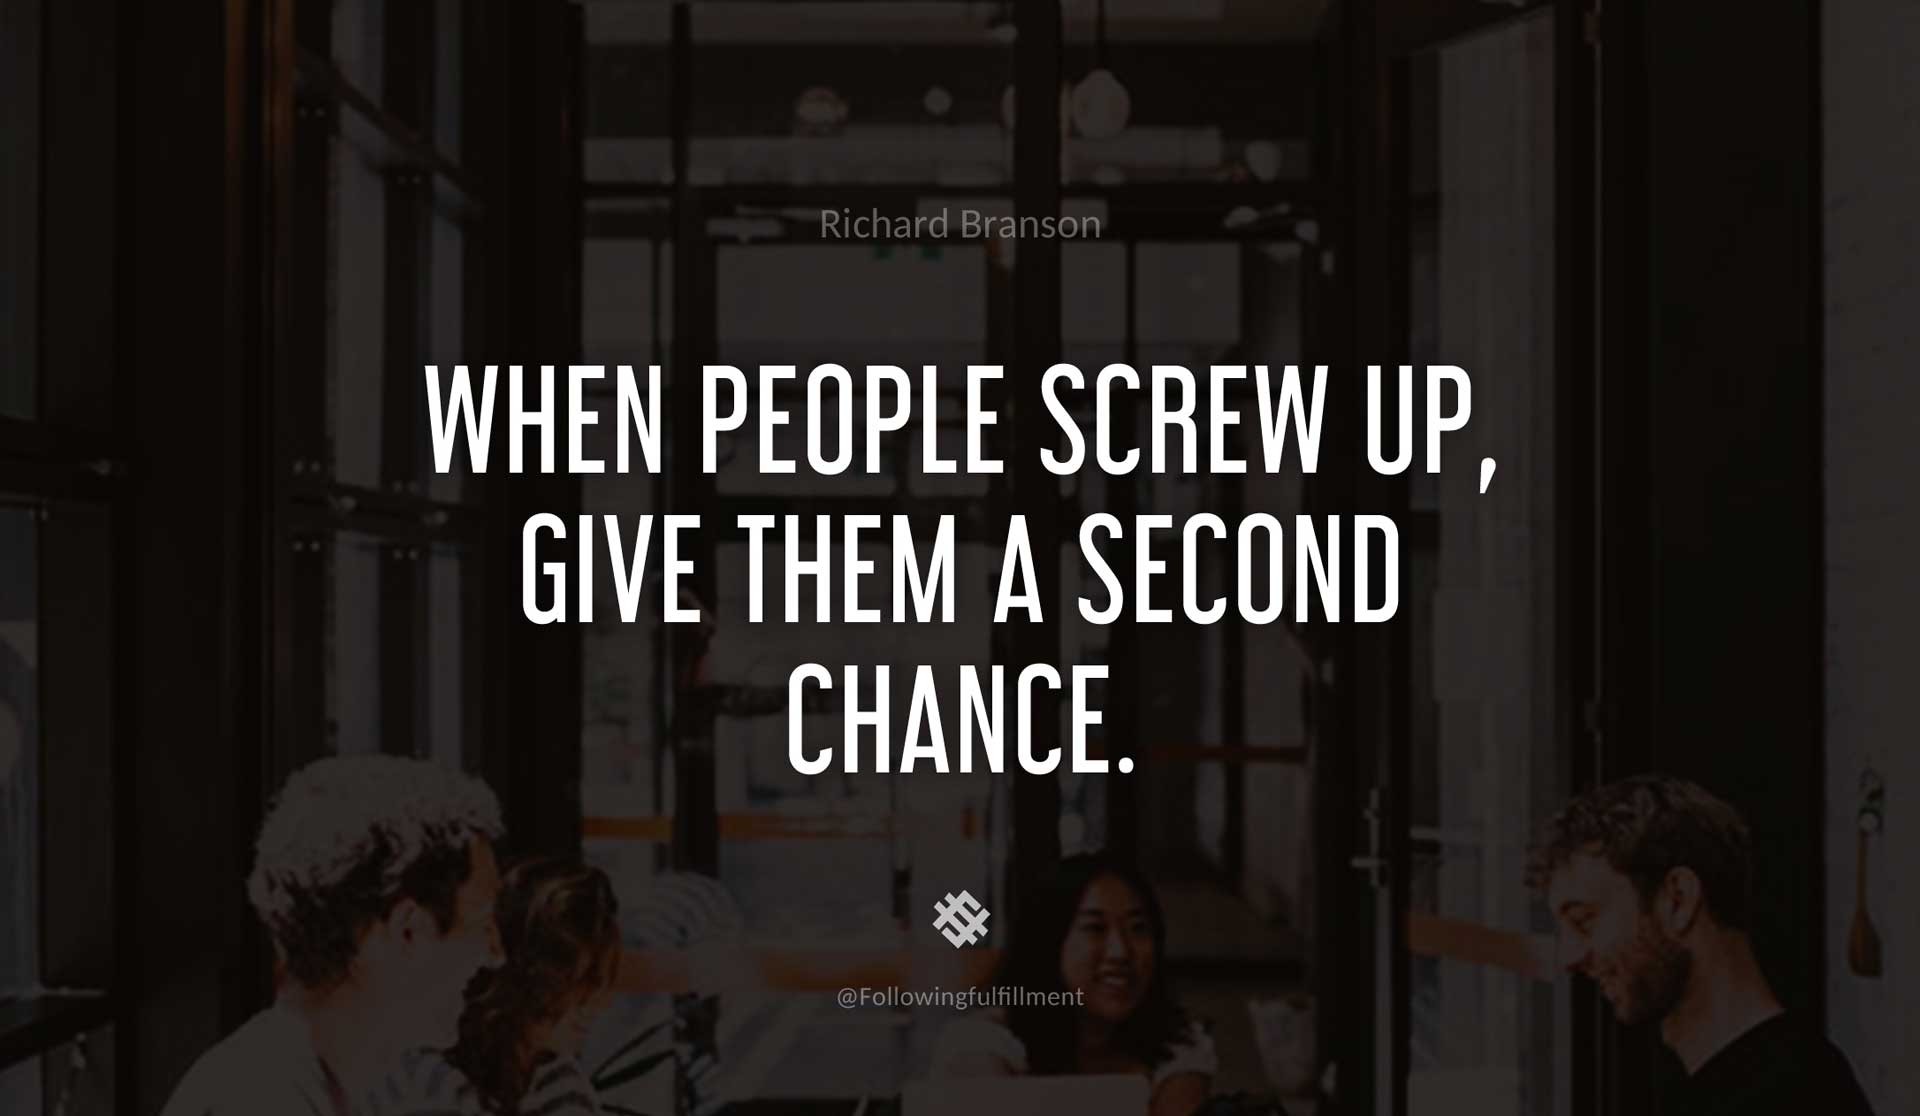 When-people-screw-up,-give-them-a-second-chance.-RICHARD-BRANSON-Quote.jpg